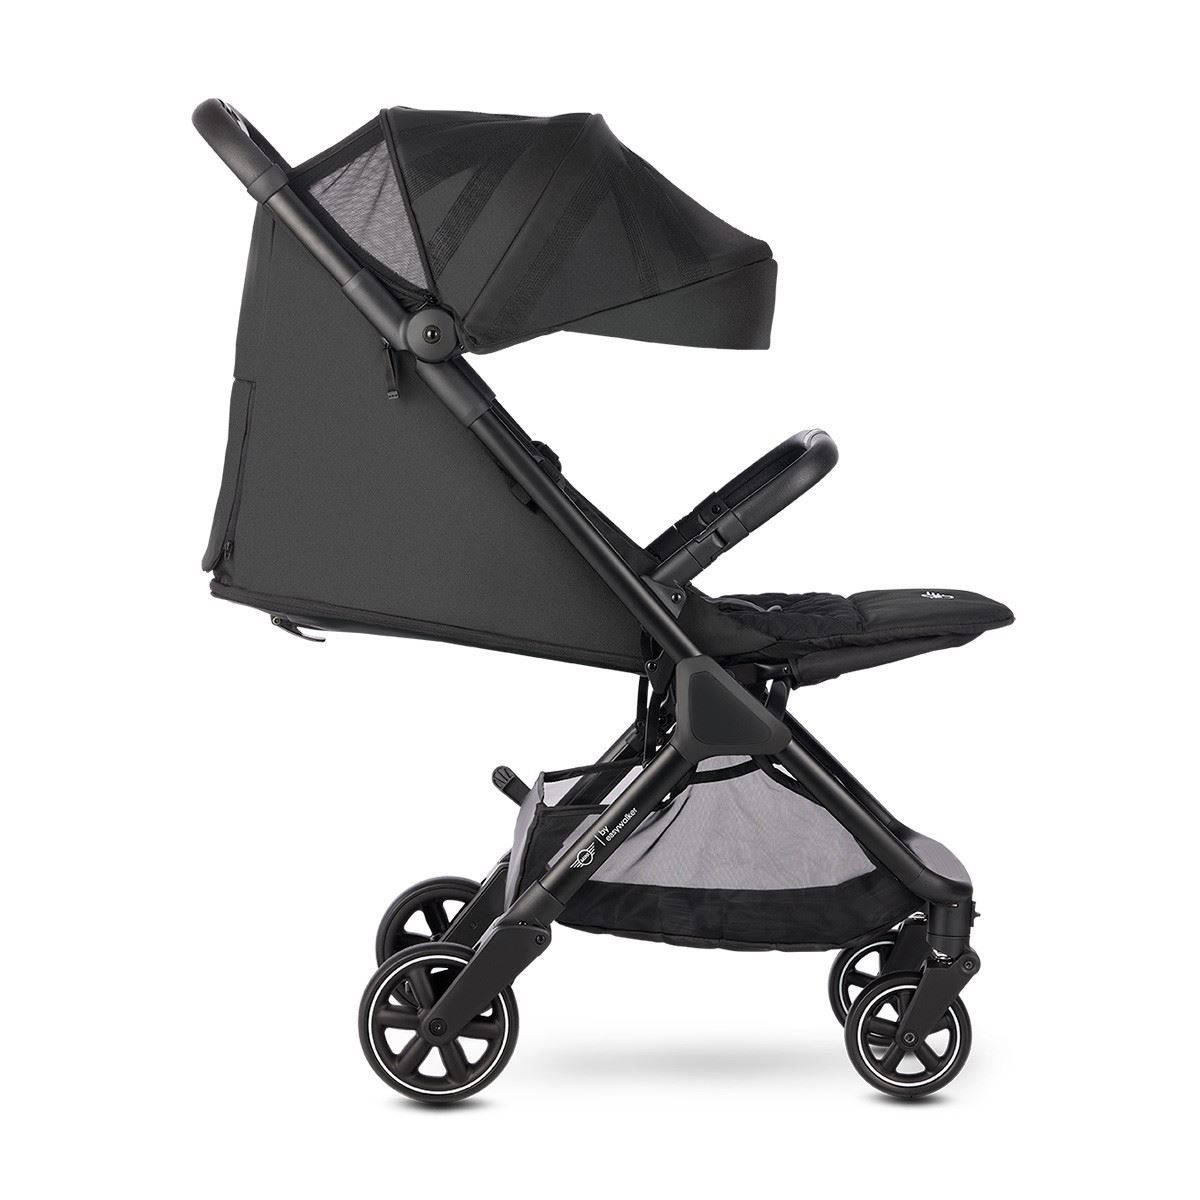 Silla Paseo Mini Buggy Snap Piccadilly black - Imagen 3